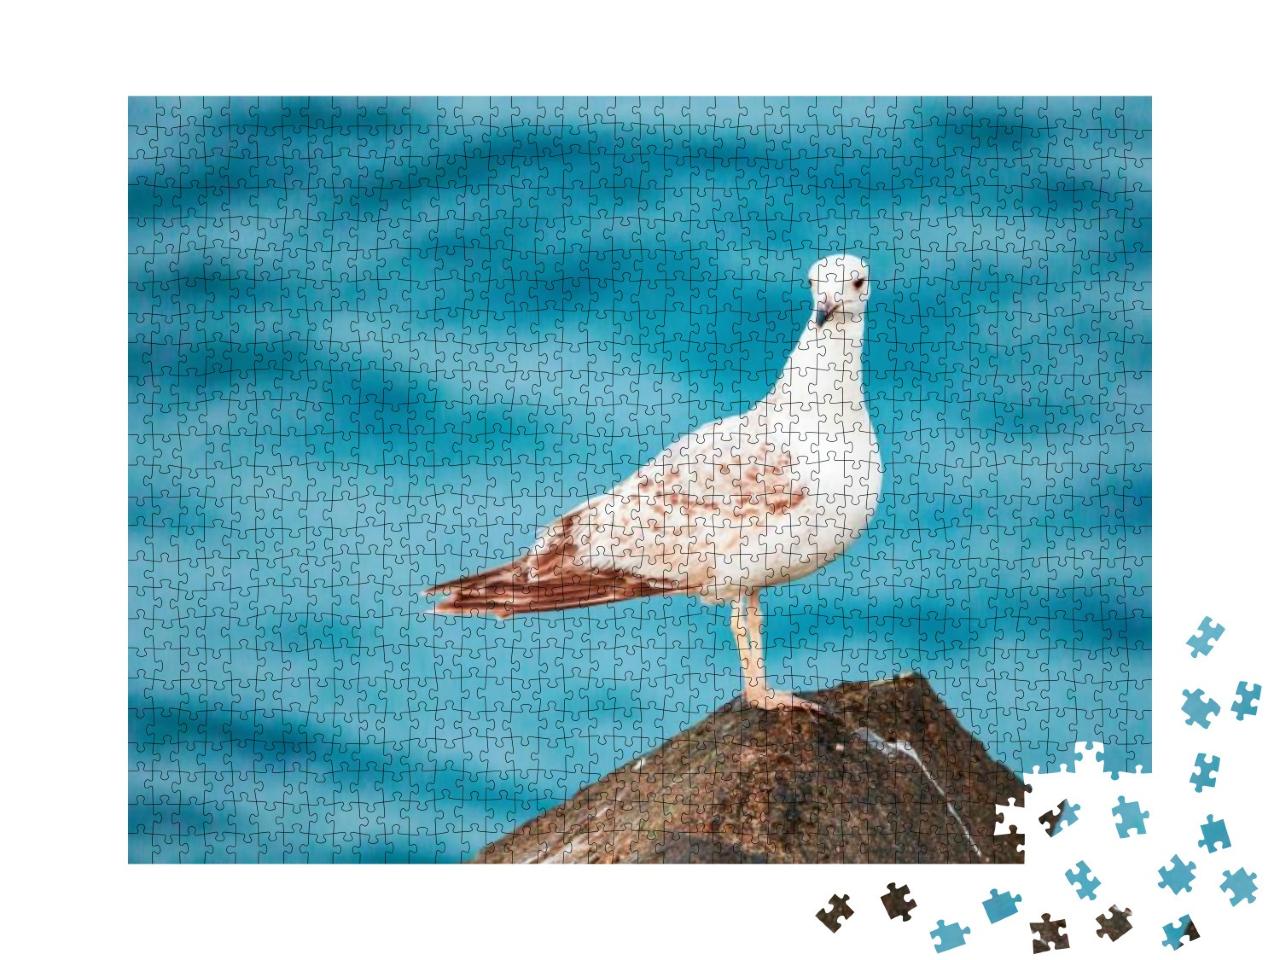 Seagulls Are Very Intelligent Birds, Who Live in Colonies... Jigsaw Puzzle with 1000 pieces